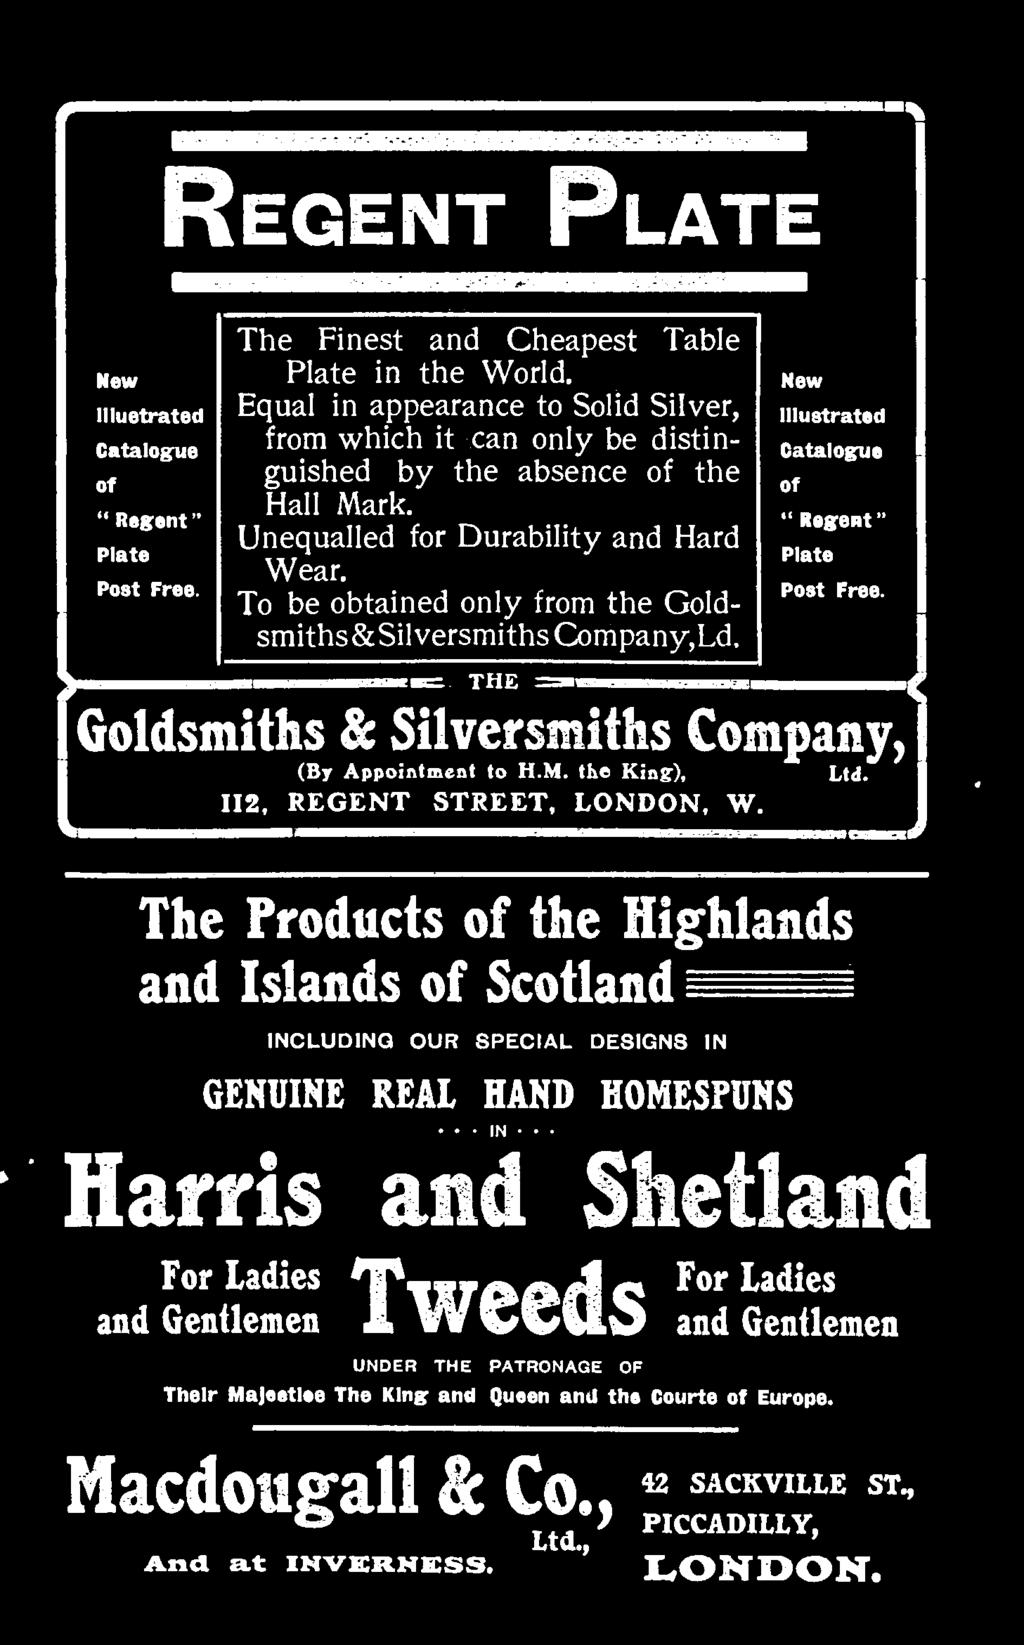 I THE - j Goldsmiths (By & Appointment Silversmiths to H.M. the King), Company, Ltd. 112, REGENT STREET, LONDON, W.